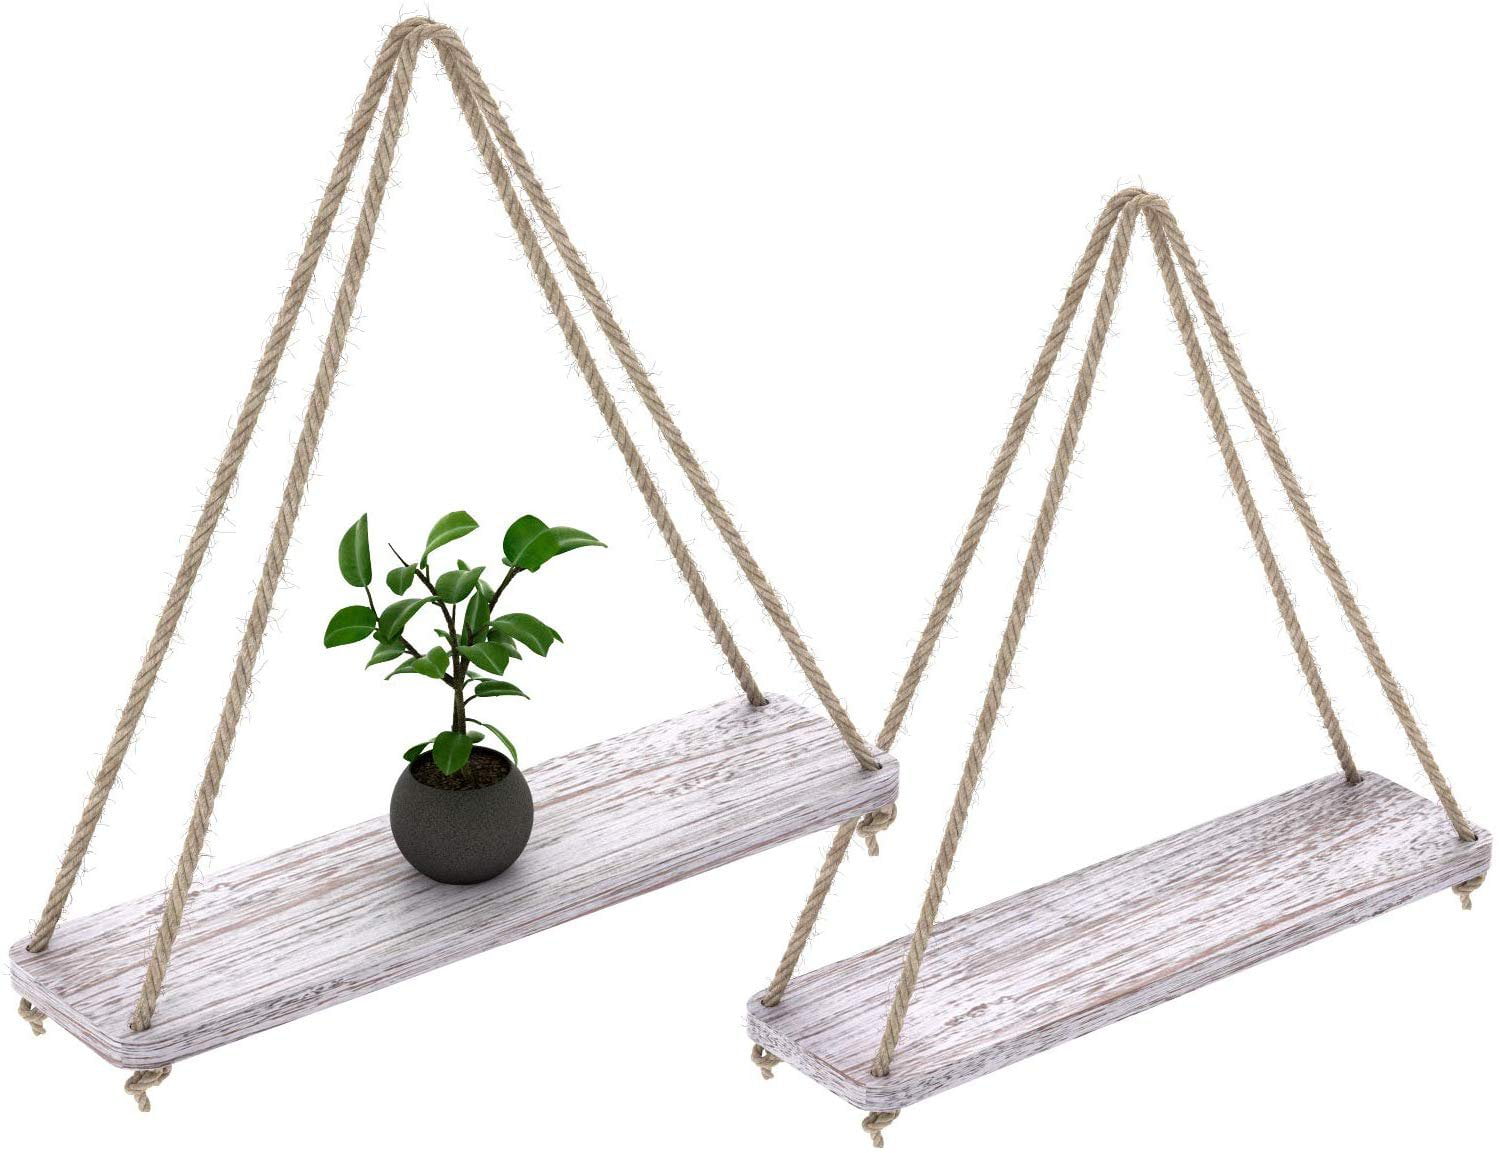 Rustic Set Of 2 Wooden Floating Shelves With String Farmhouse Hanging Shelves For Living Room Wall Small Kitchen Shelves With Rope 17 X5 2 Distressed Rustic White Color Walmart Com Walmart Com